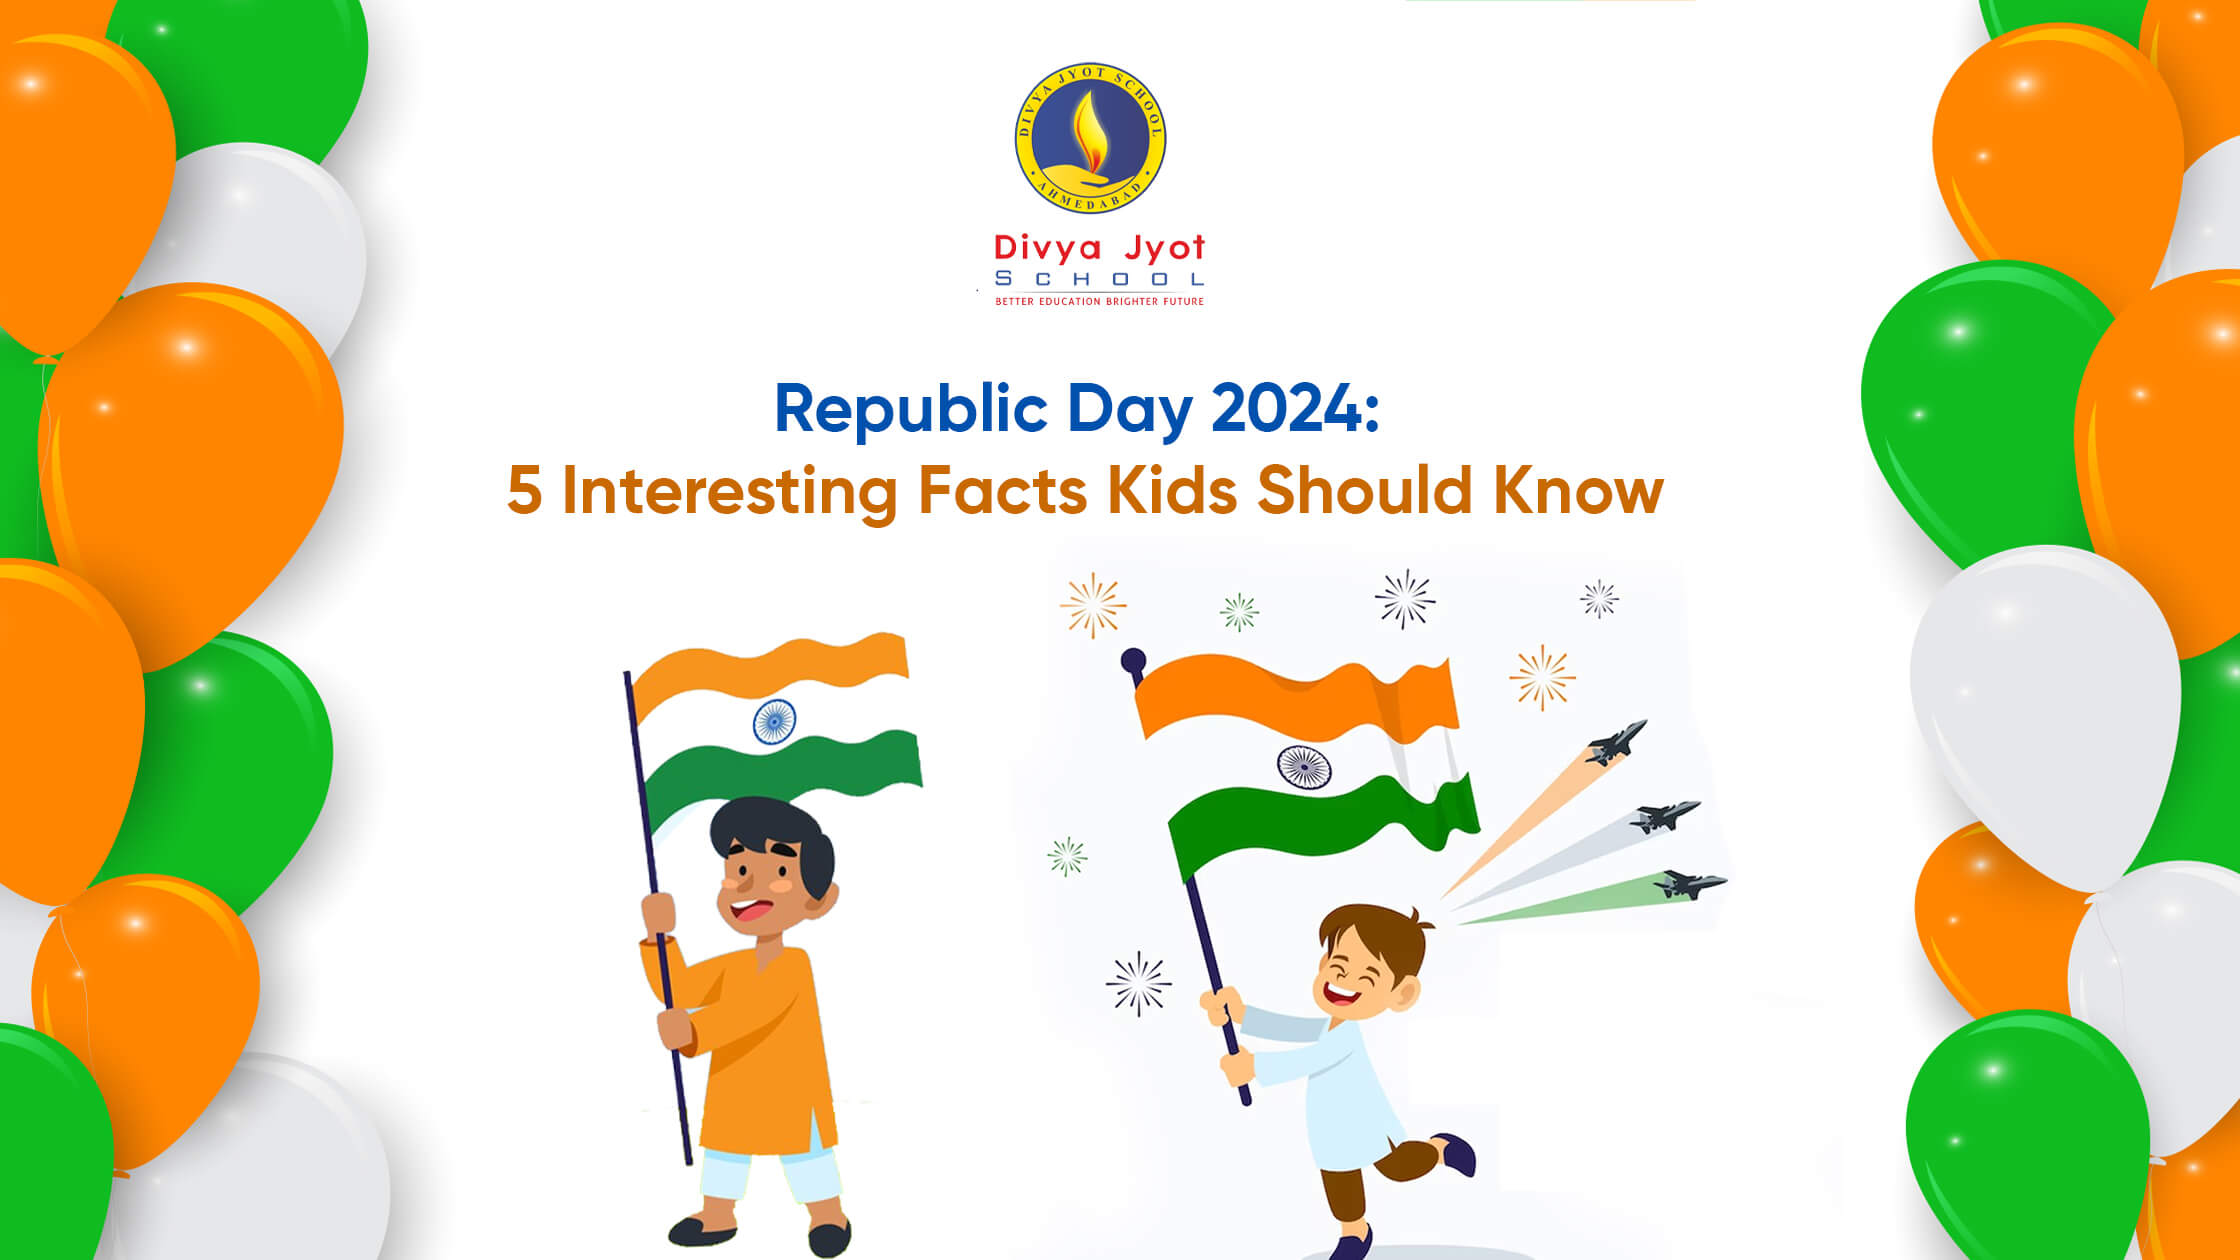 Republic Day 2024: 5 Interesting Facts Kids Should Know